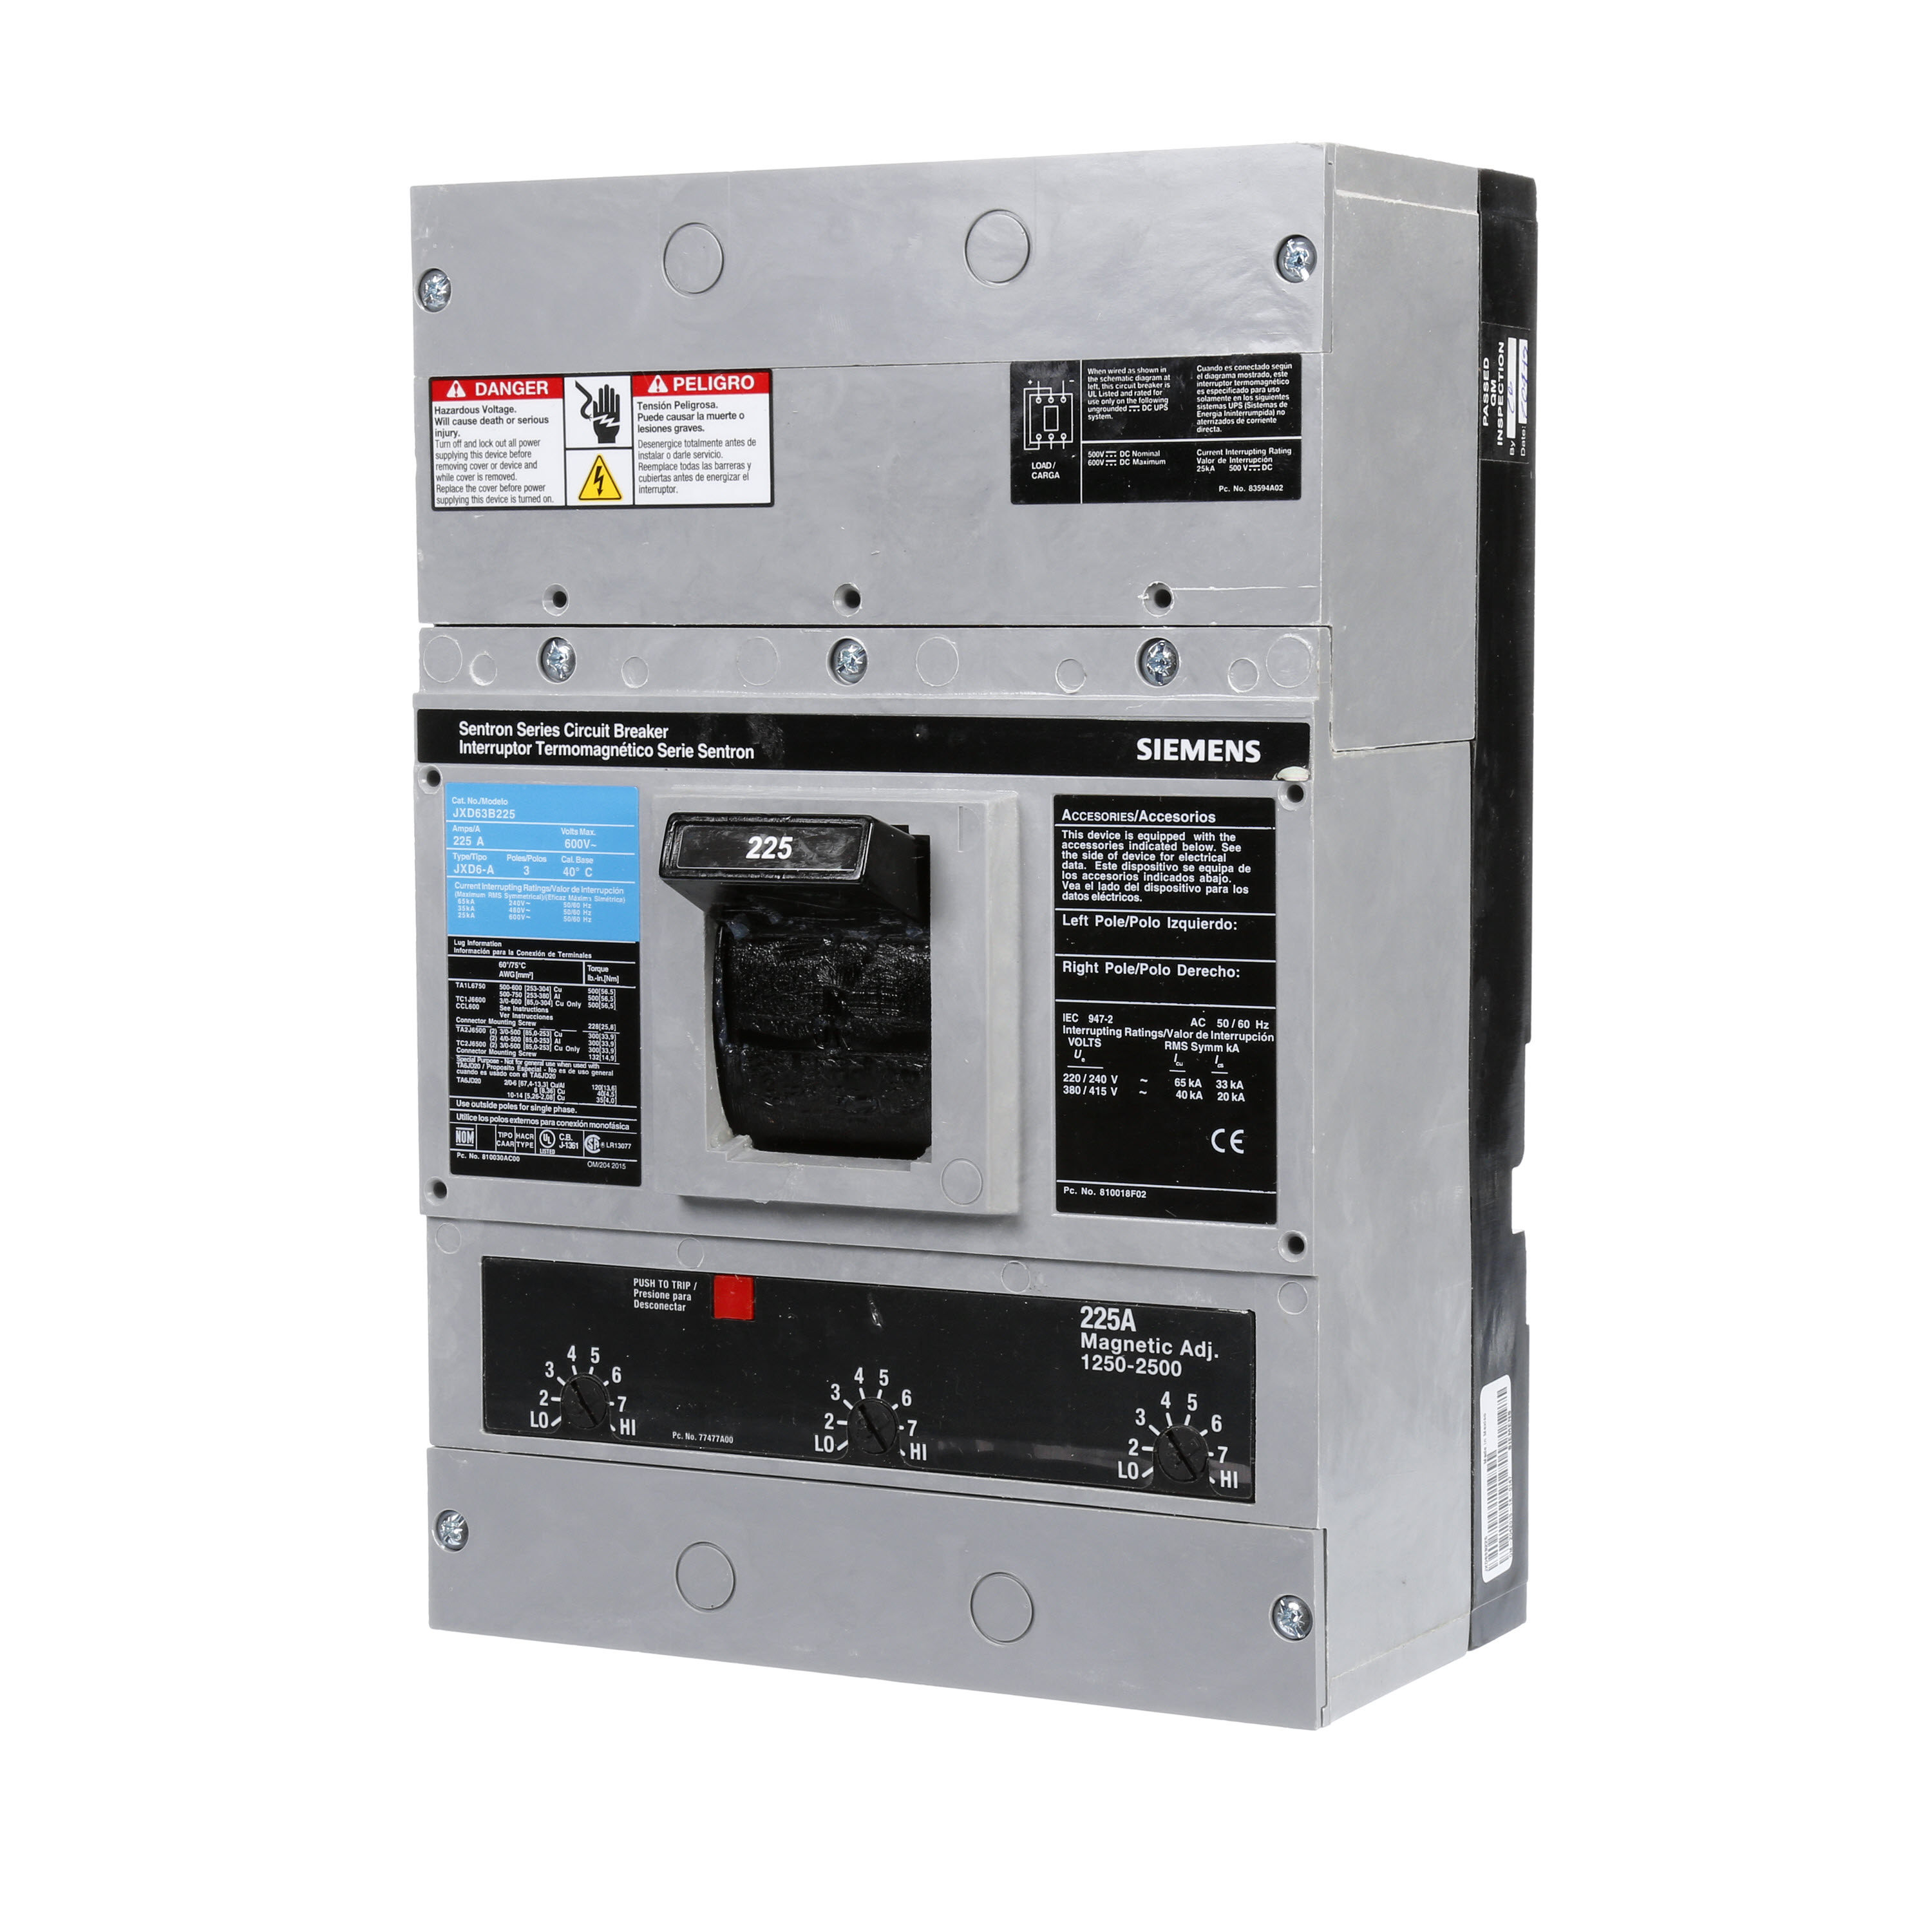 SIEMENS LOW VOLTAGE SENTRON MOLDED CASE CIRCUIT BREAKER WITH THERMAL - MAGNETICTRIP UNIT. ASSEMBLED STANDARD 40 DEG C BREAKER JD FRAME WITH STANDARD BREAKING CAPACITY. 225A 3-POLE (25KAIC AT 600V) (35KAIC AT 480V). NON-INTERCHANGEABLE TRIP UNIT. SPECIAL FEATURES NO LUGS INSTALLED. DIMENSIONS (W x H x D) IN 7.50 x 11.0 x 4.00.